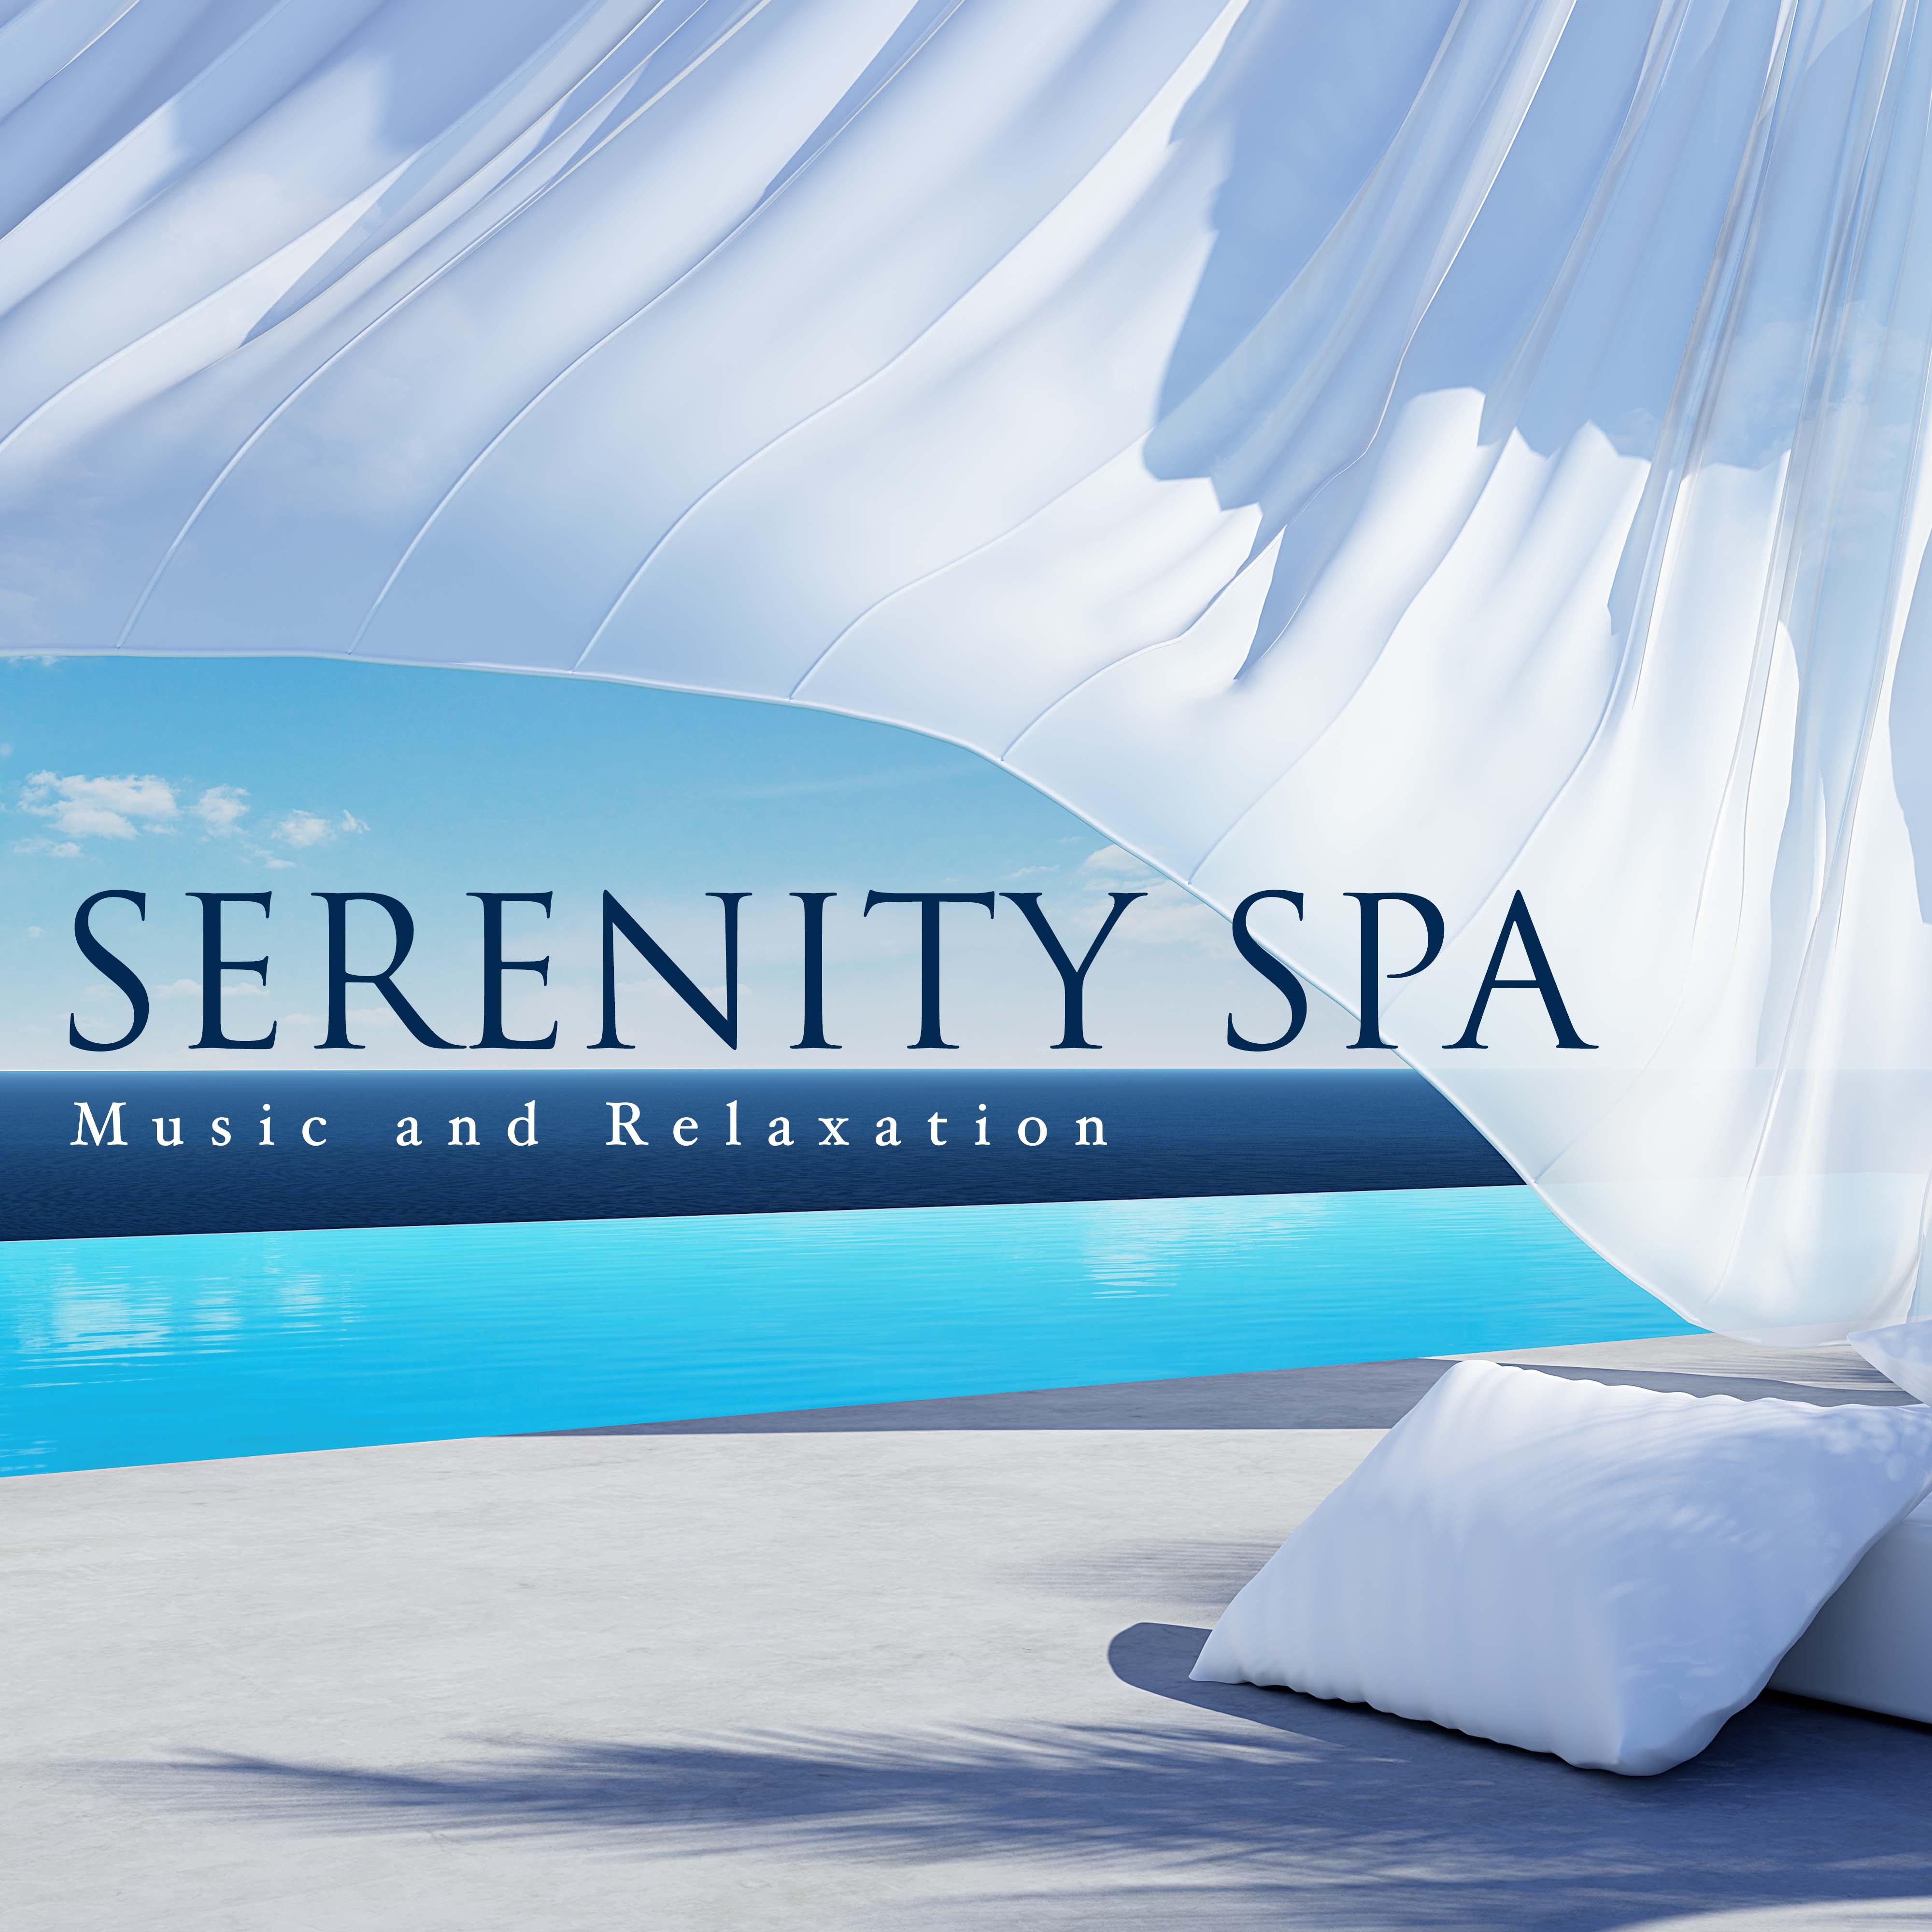 Serenity Spa - Music and Relaxation